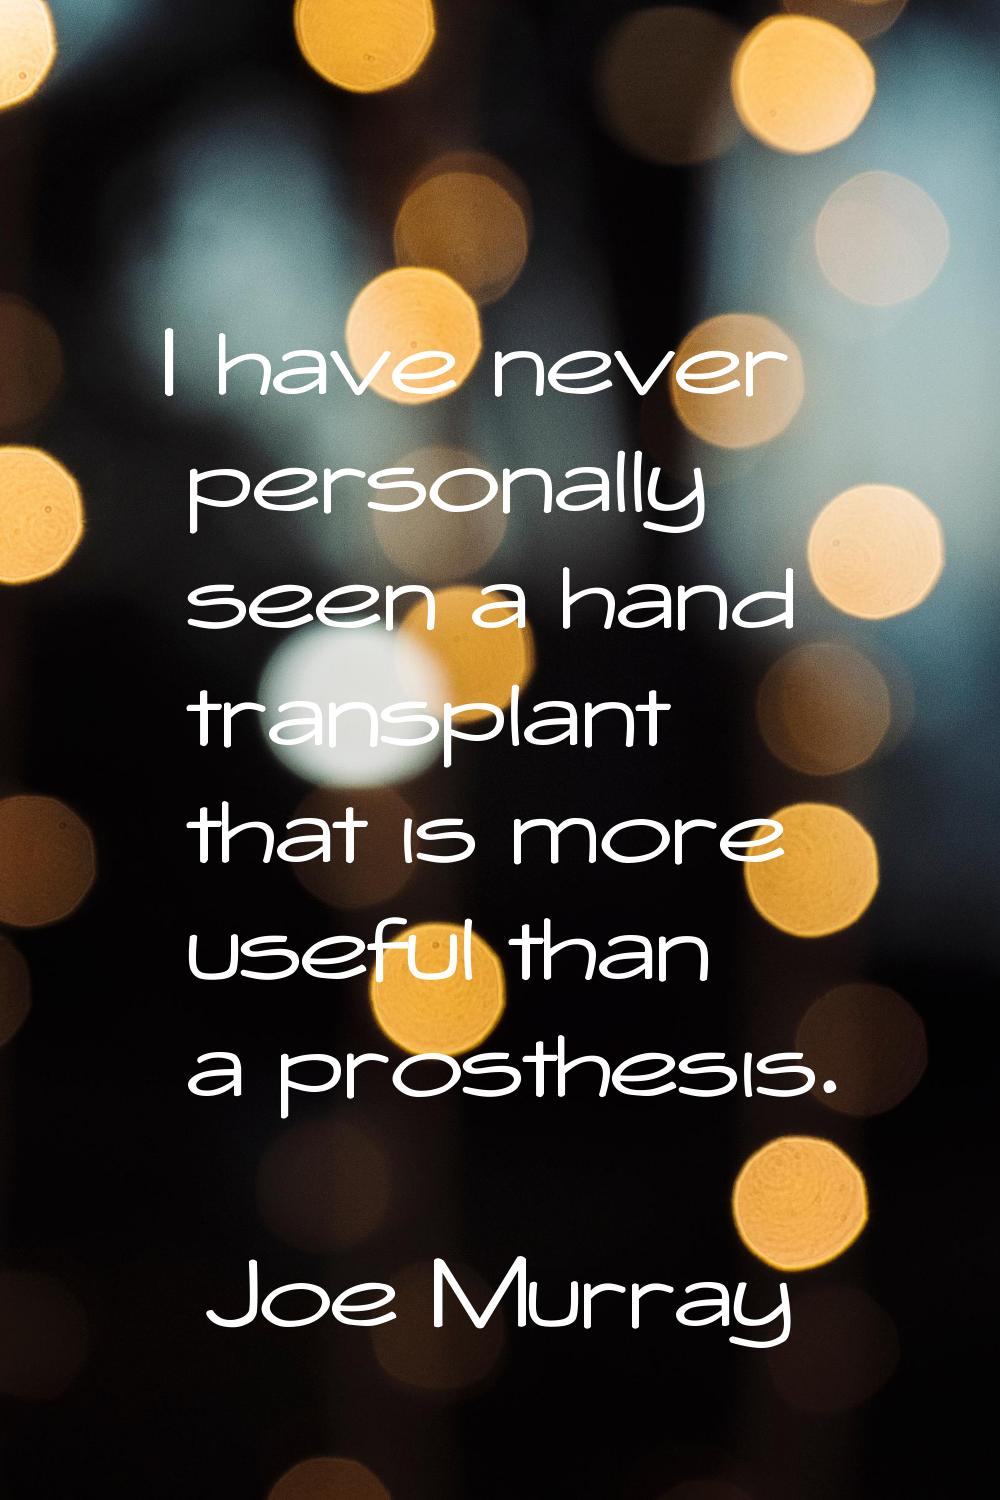 I have never personally seen a hand transplant that is more useful than a prosthesis.